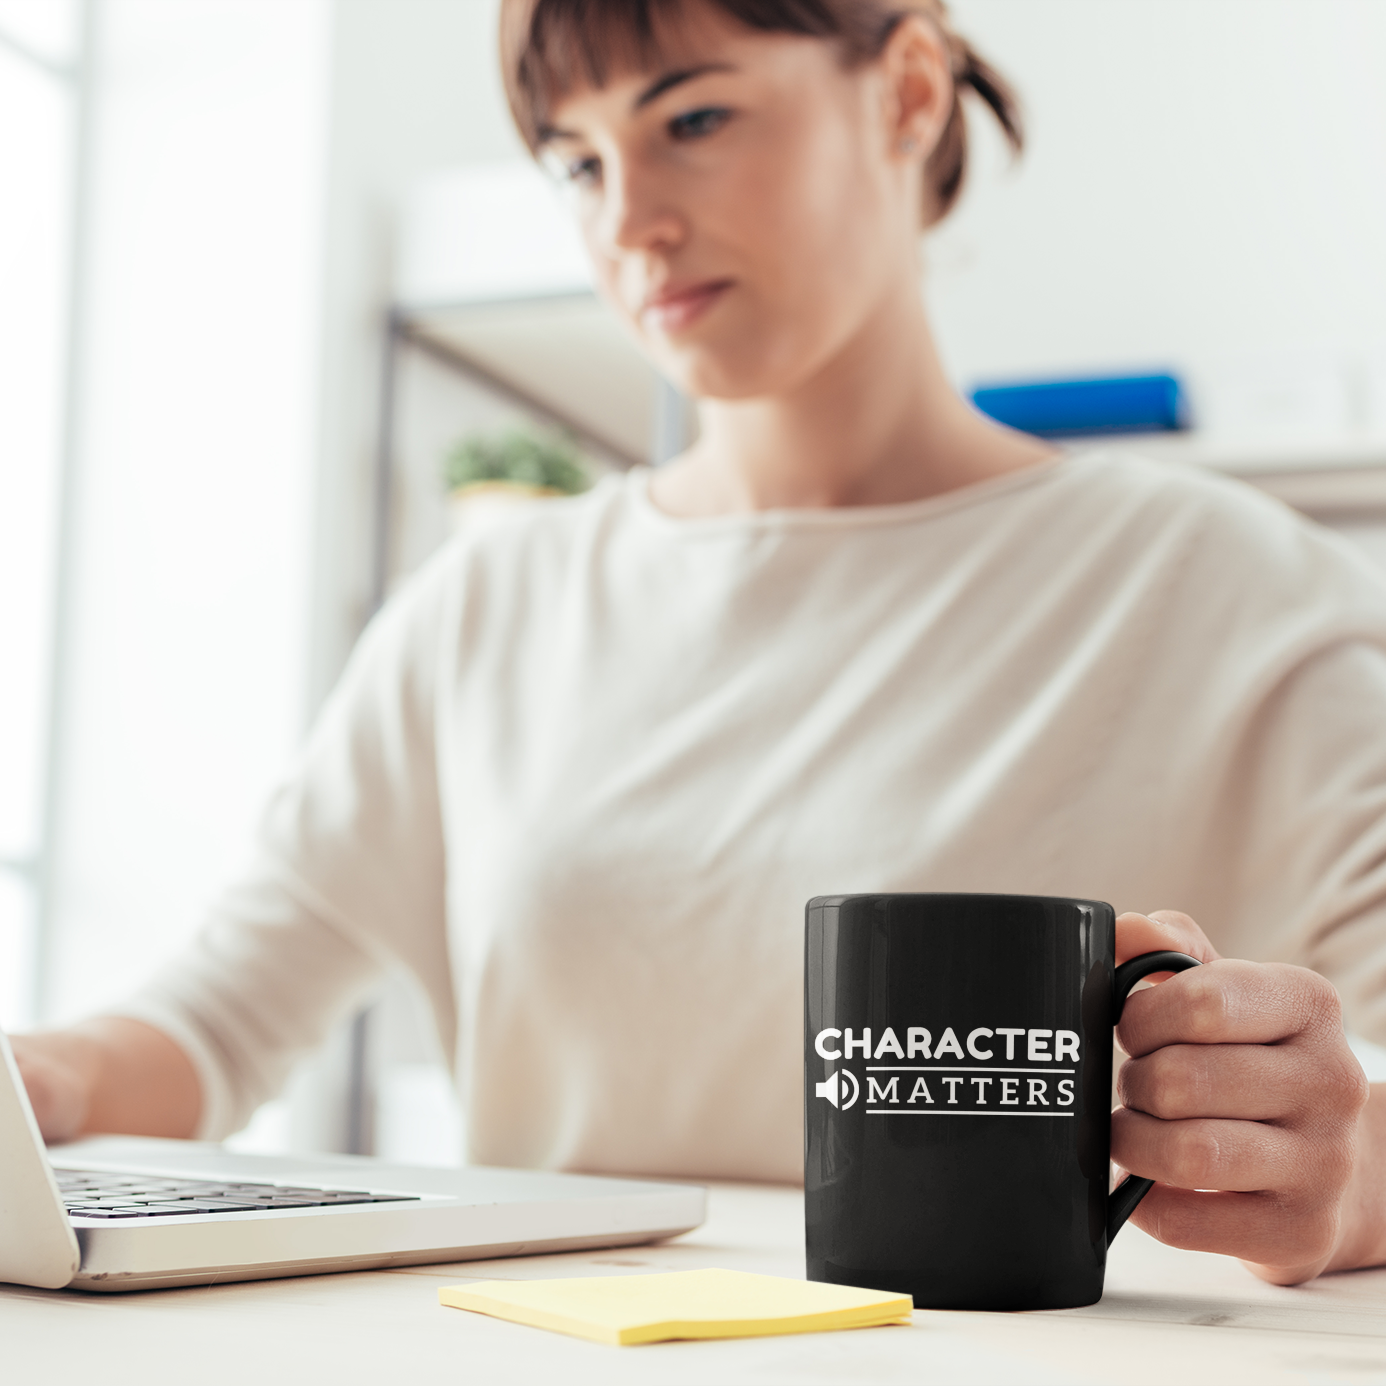 Bear fruit with Character Matters quotable mugs the way to go